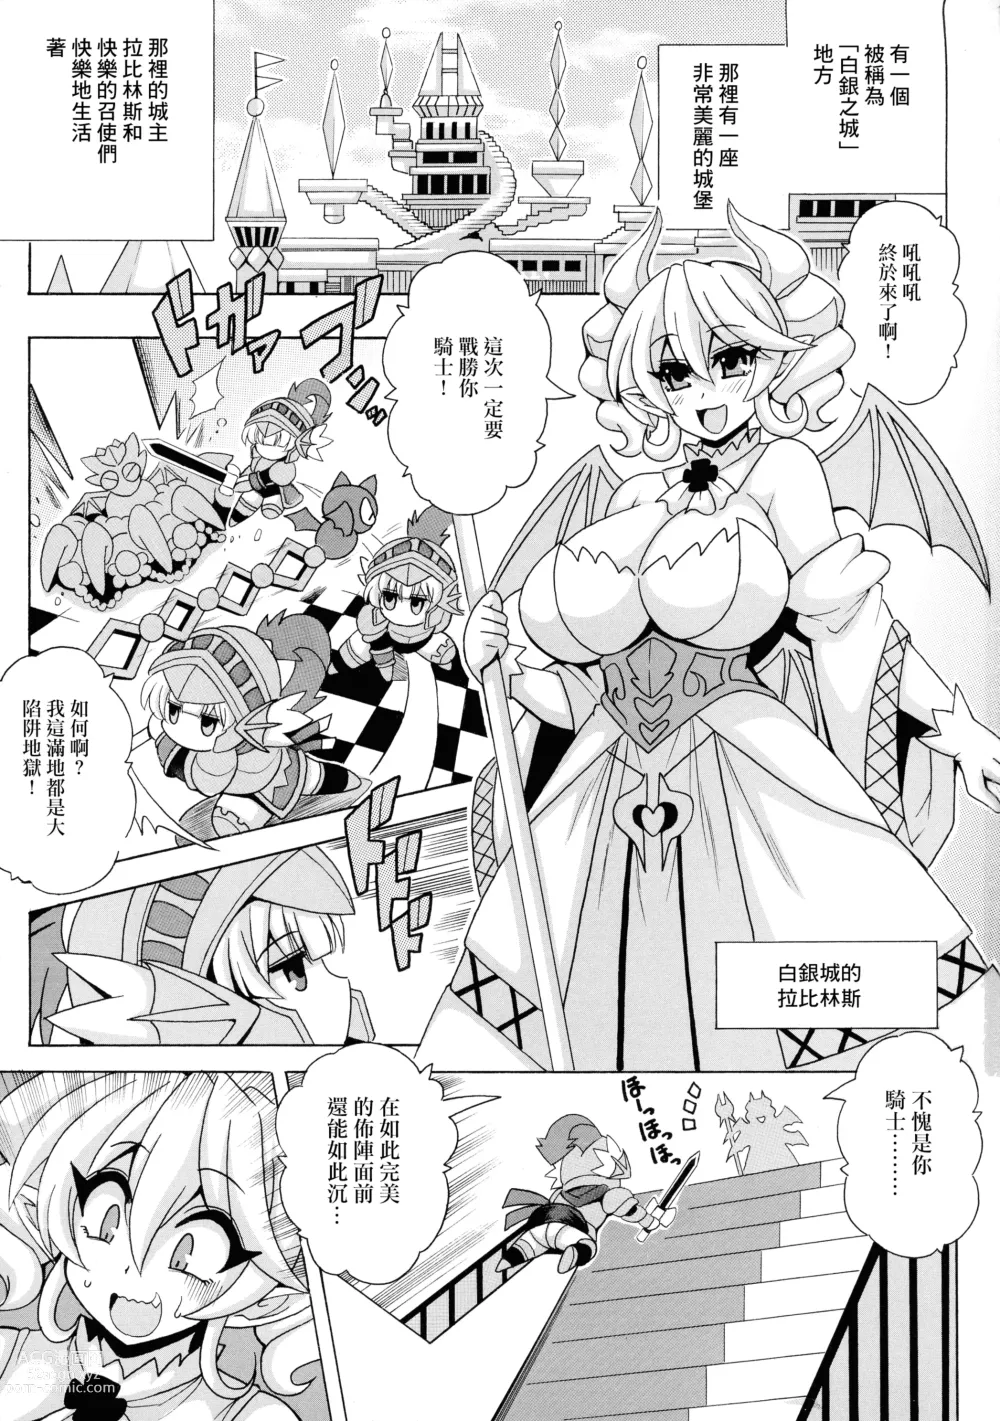 Page 3 of doujinshi LABRYNTH MILK